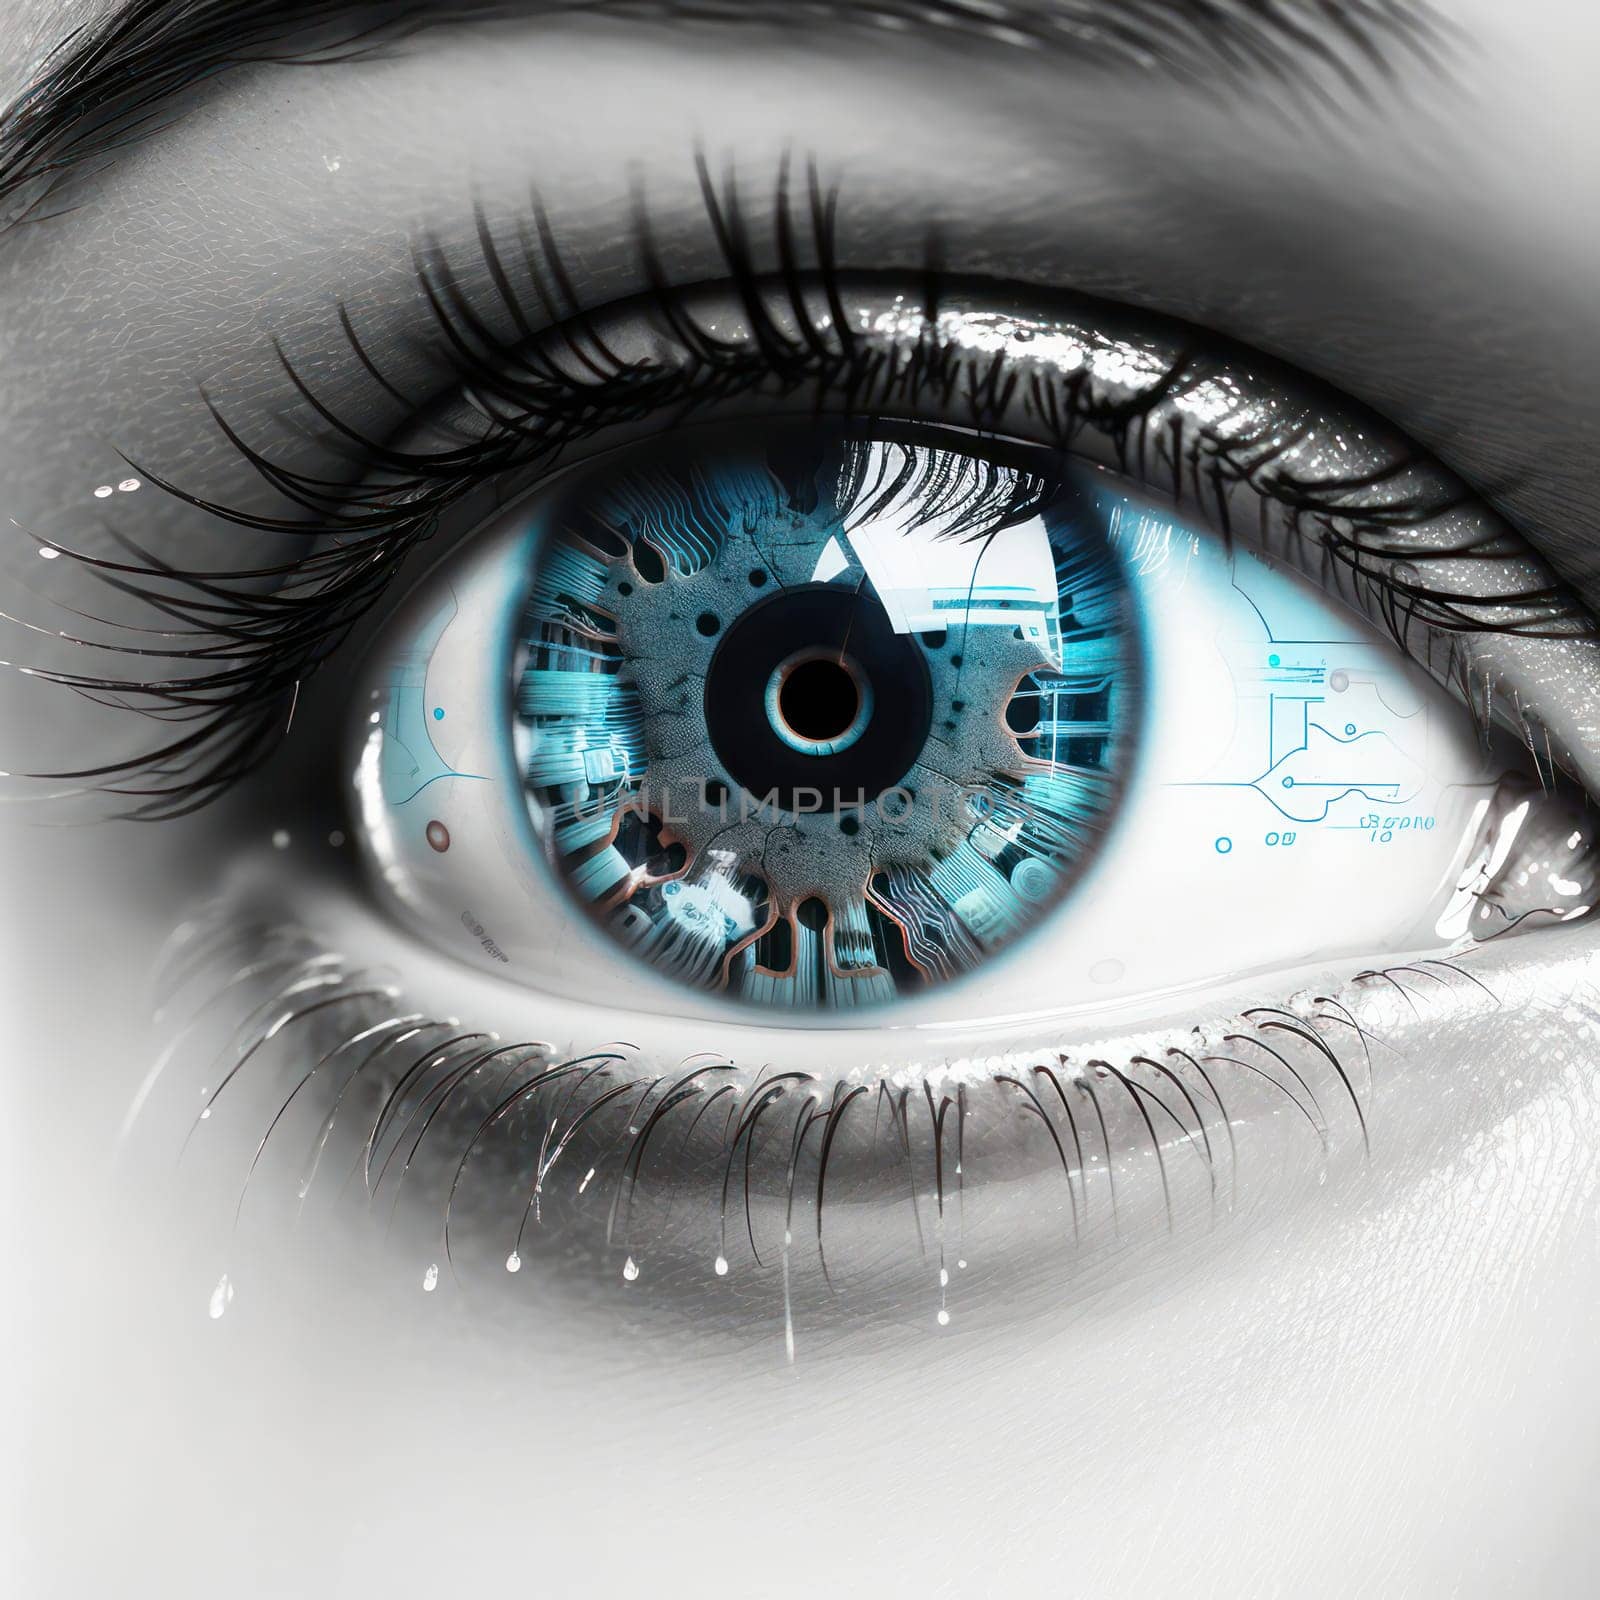 Digital Vision: A Close-Up View of a Woman's Eye with Futuristic Technology"